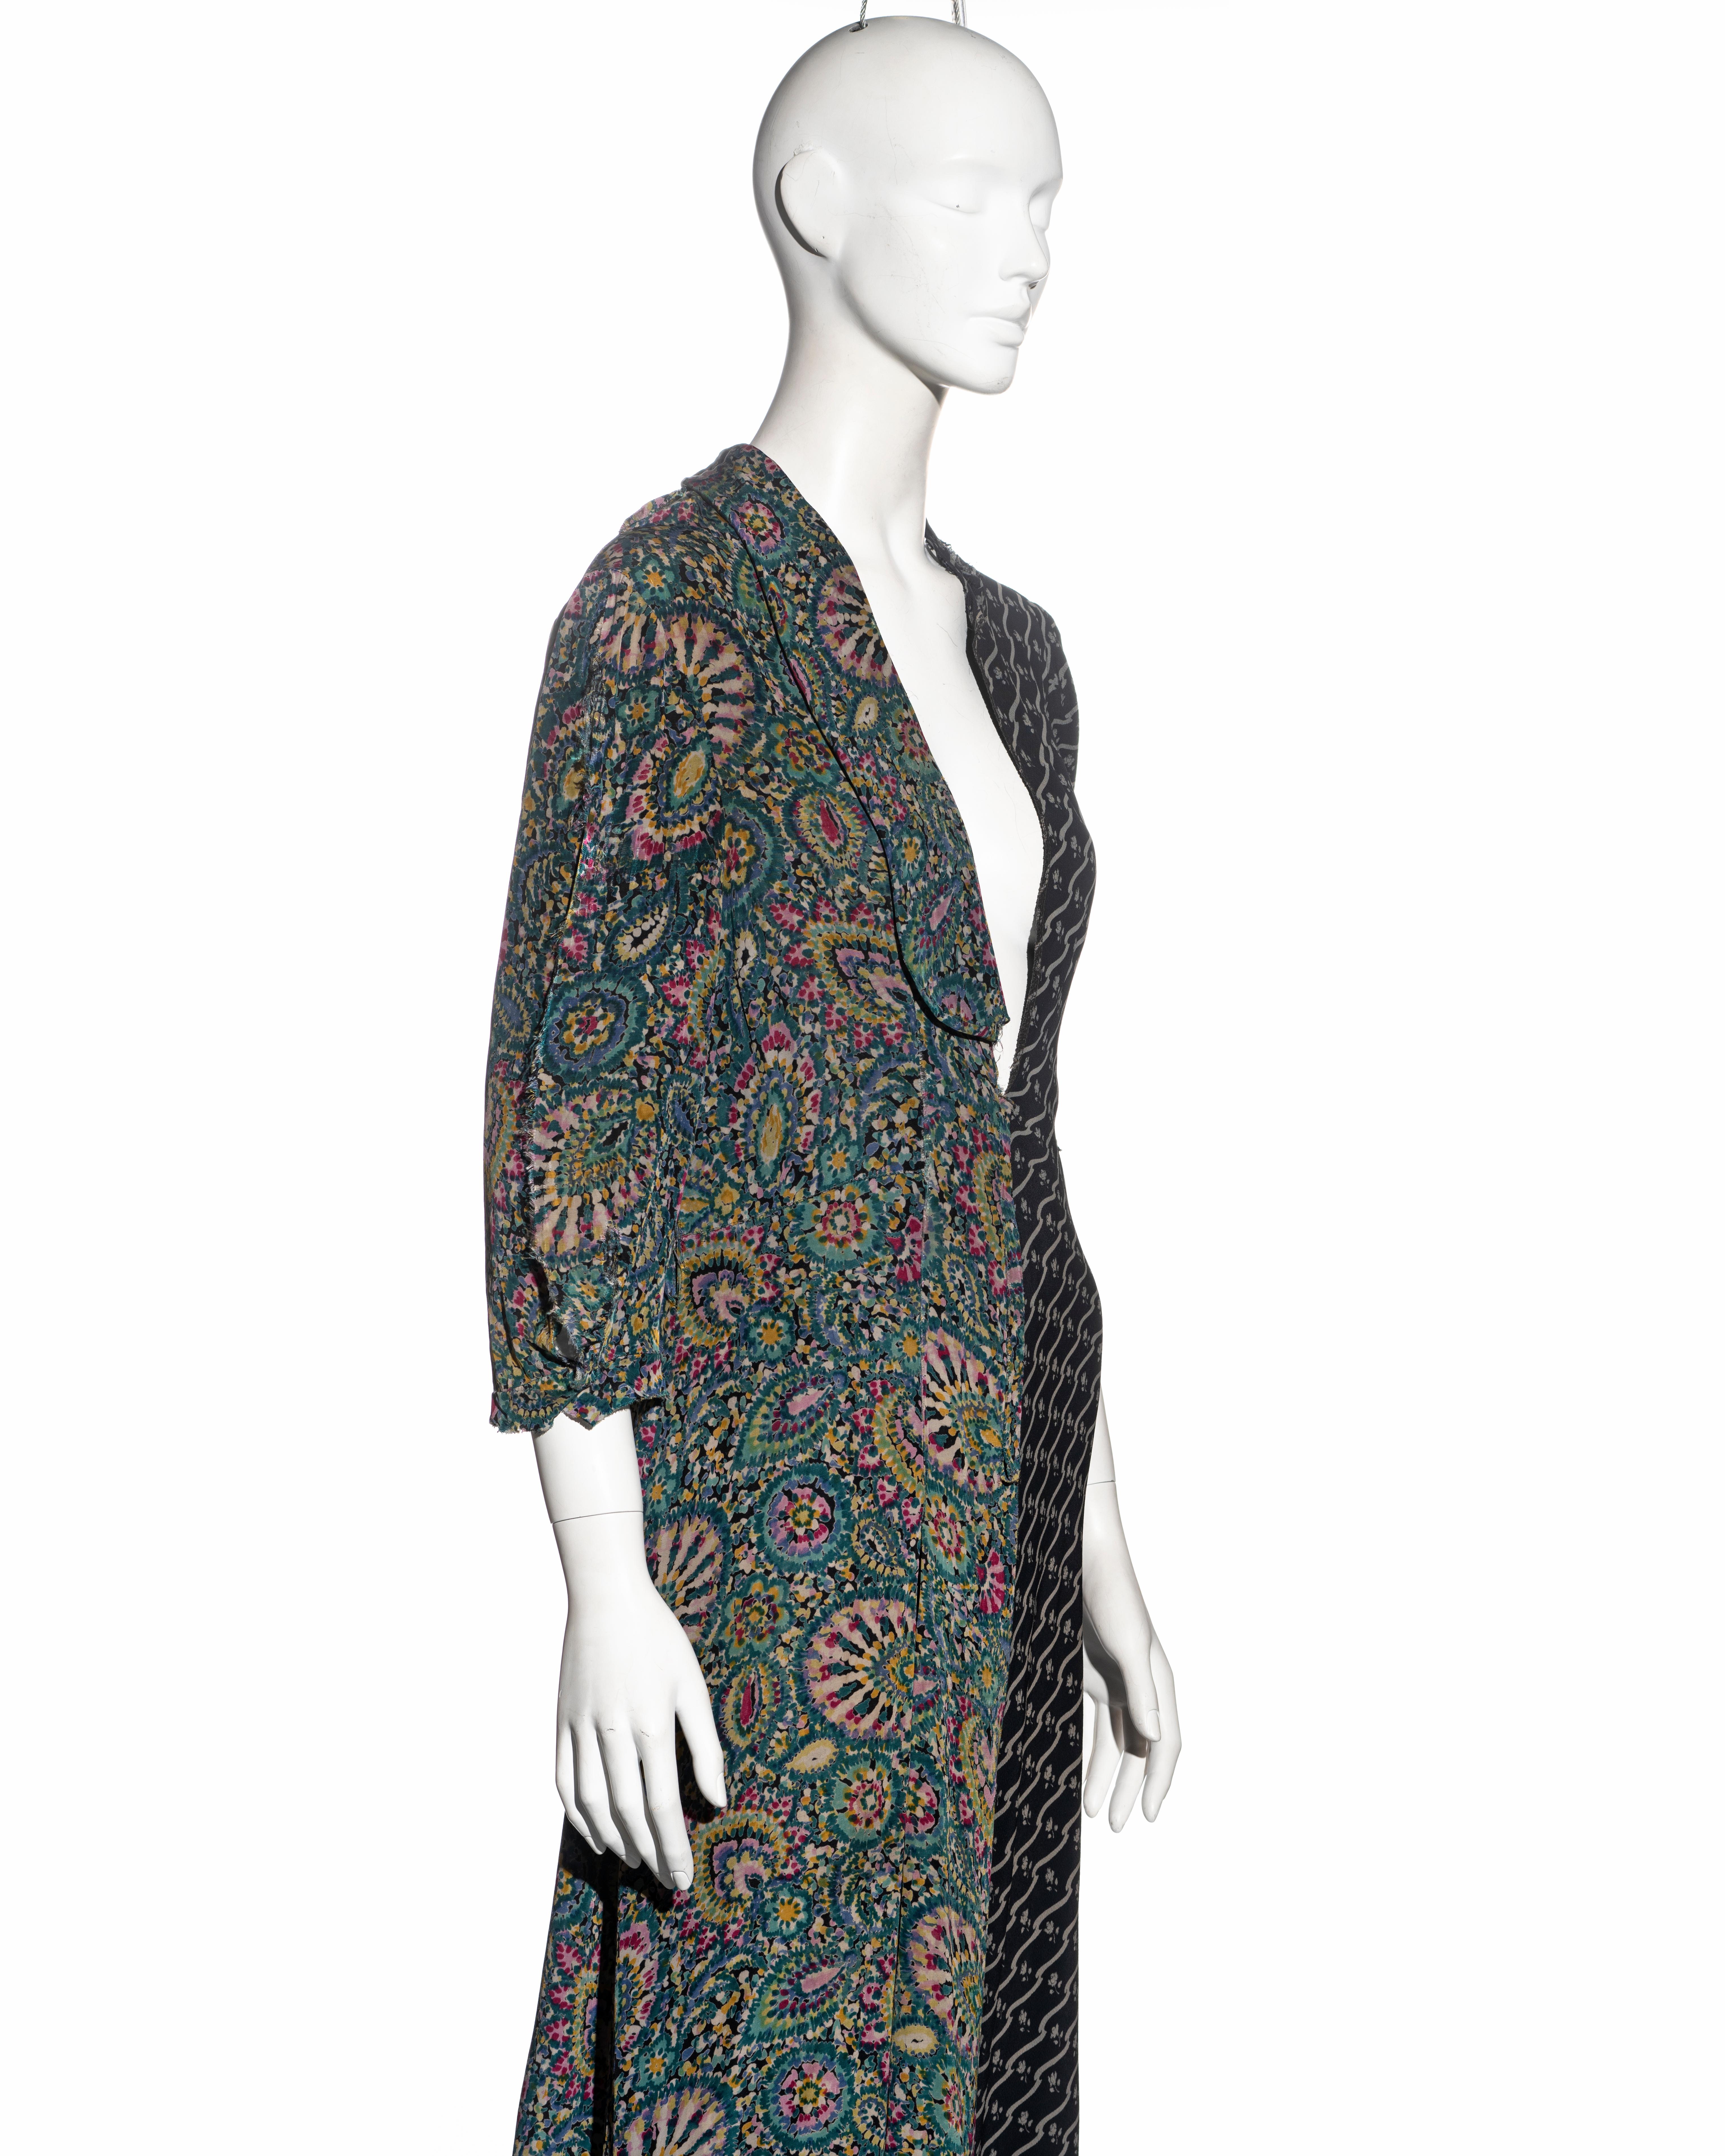 Martin Margiela artisanal dress made from reclaimed vintage dresses, fw 1993 In Fair Condition For Sale In London, GB